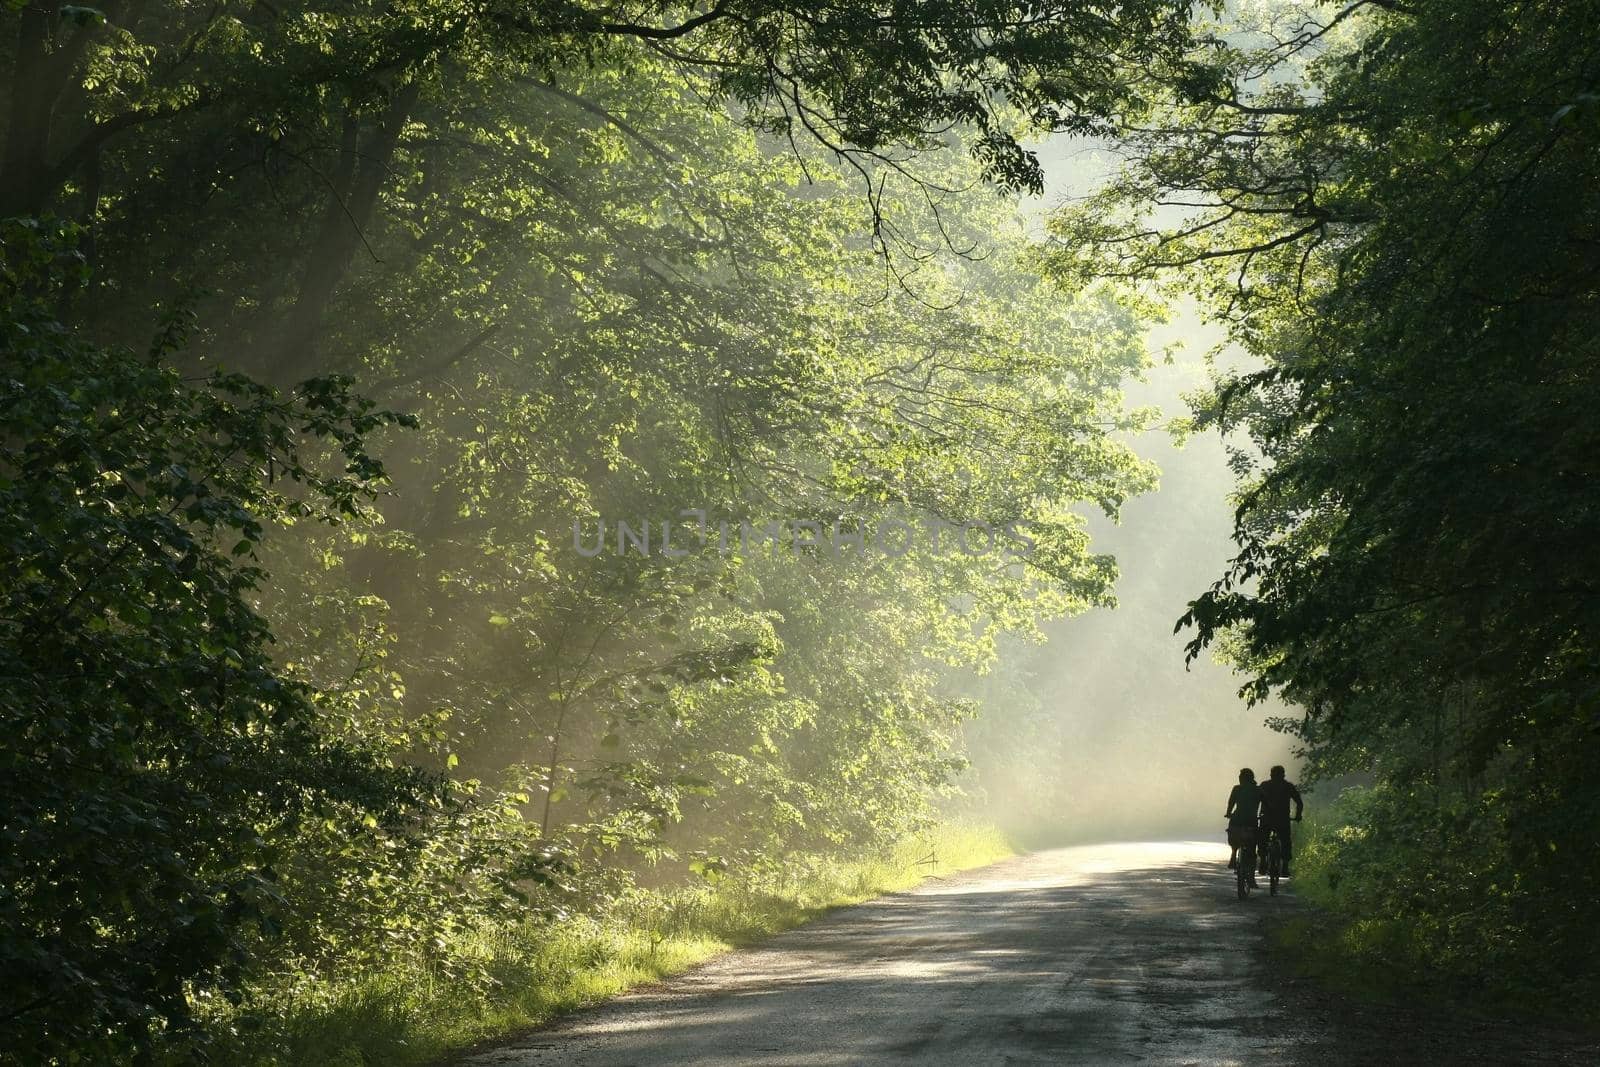 Cyclists ride a country road by nature78